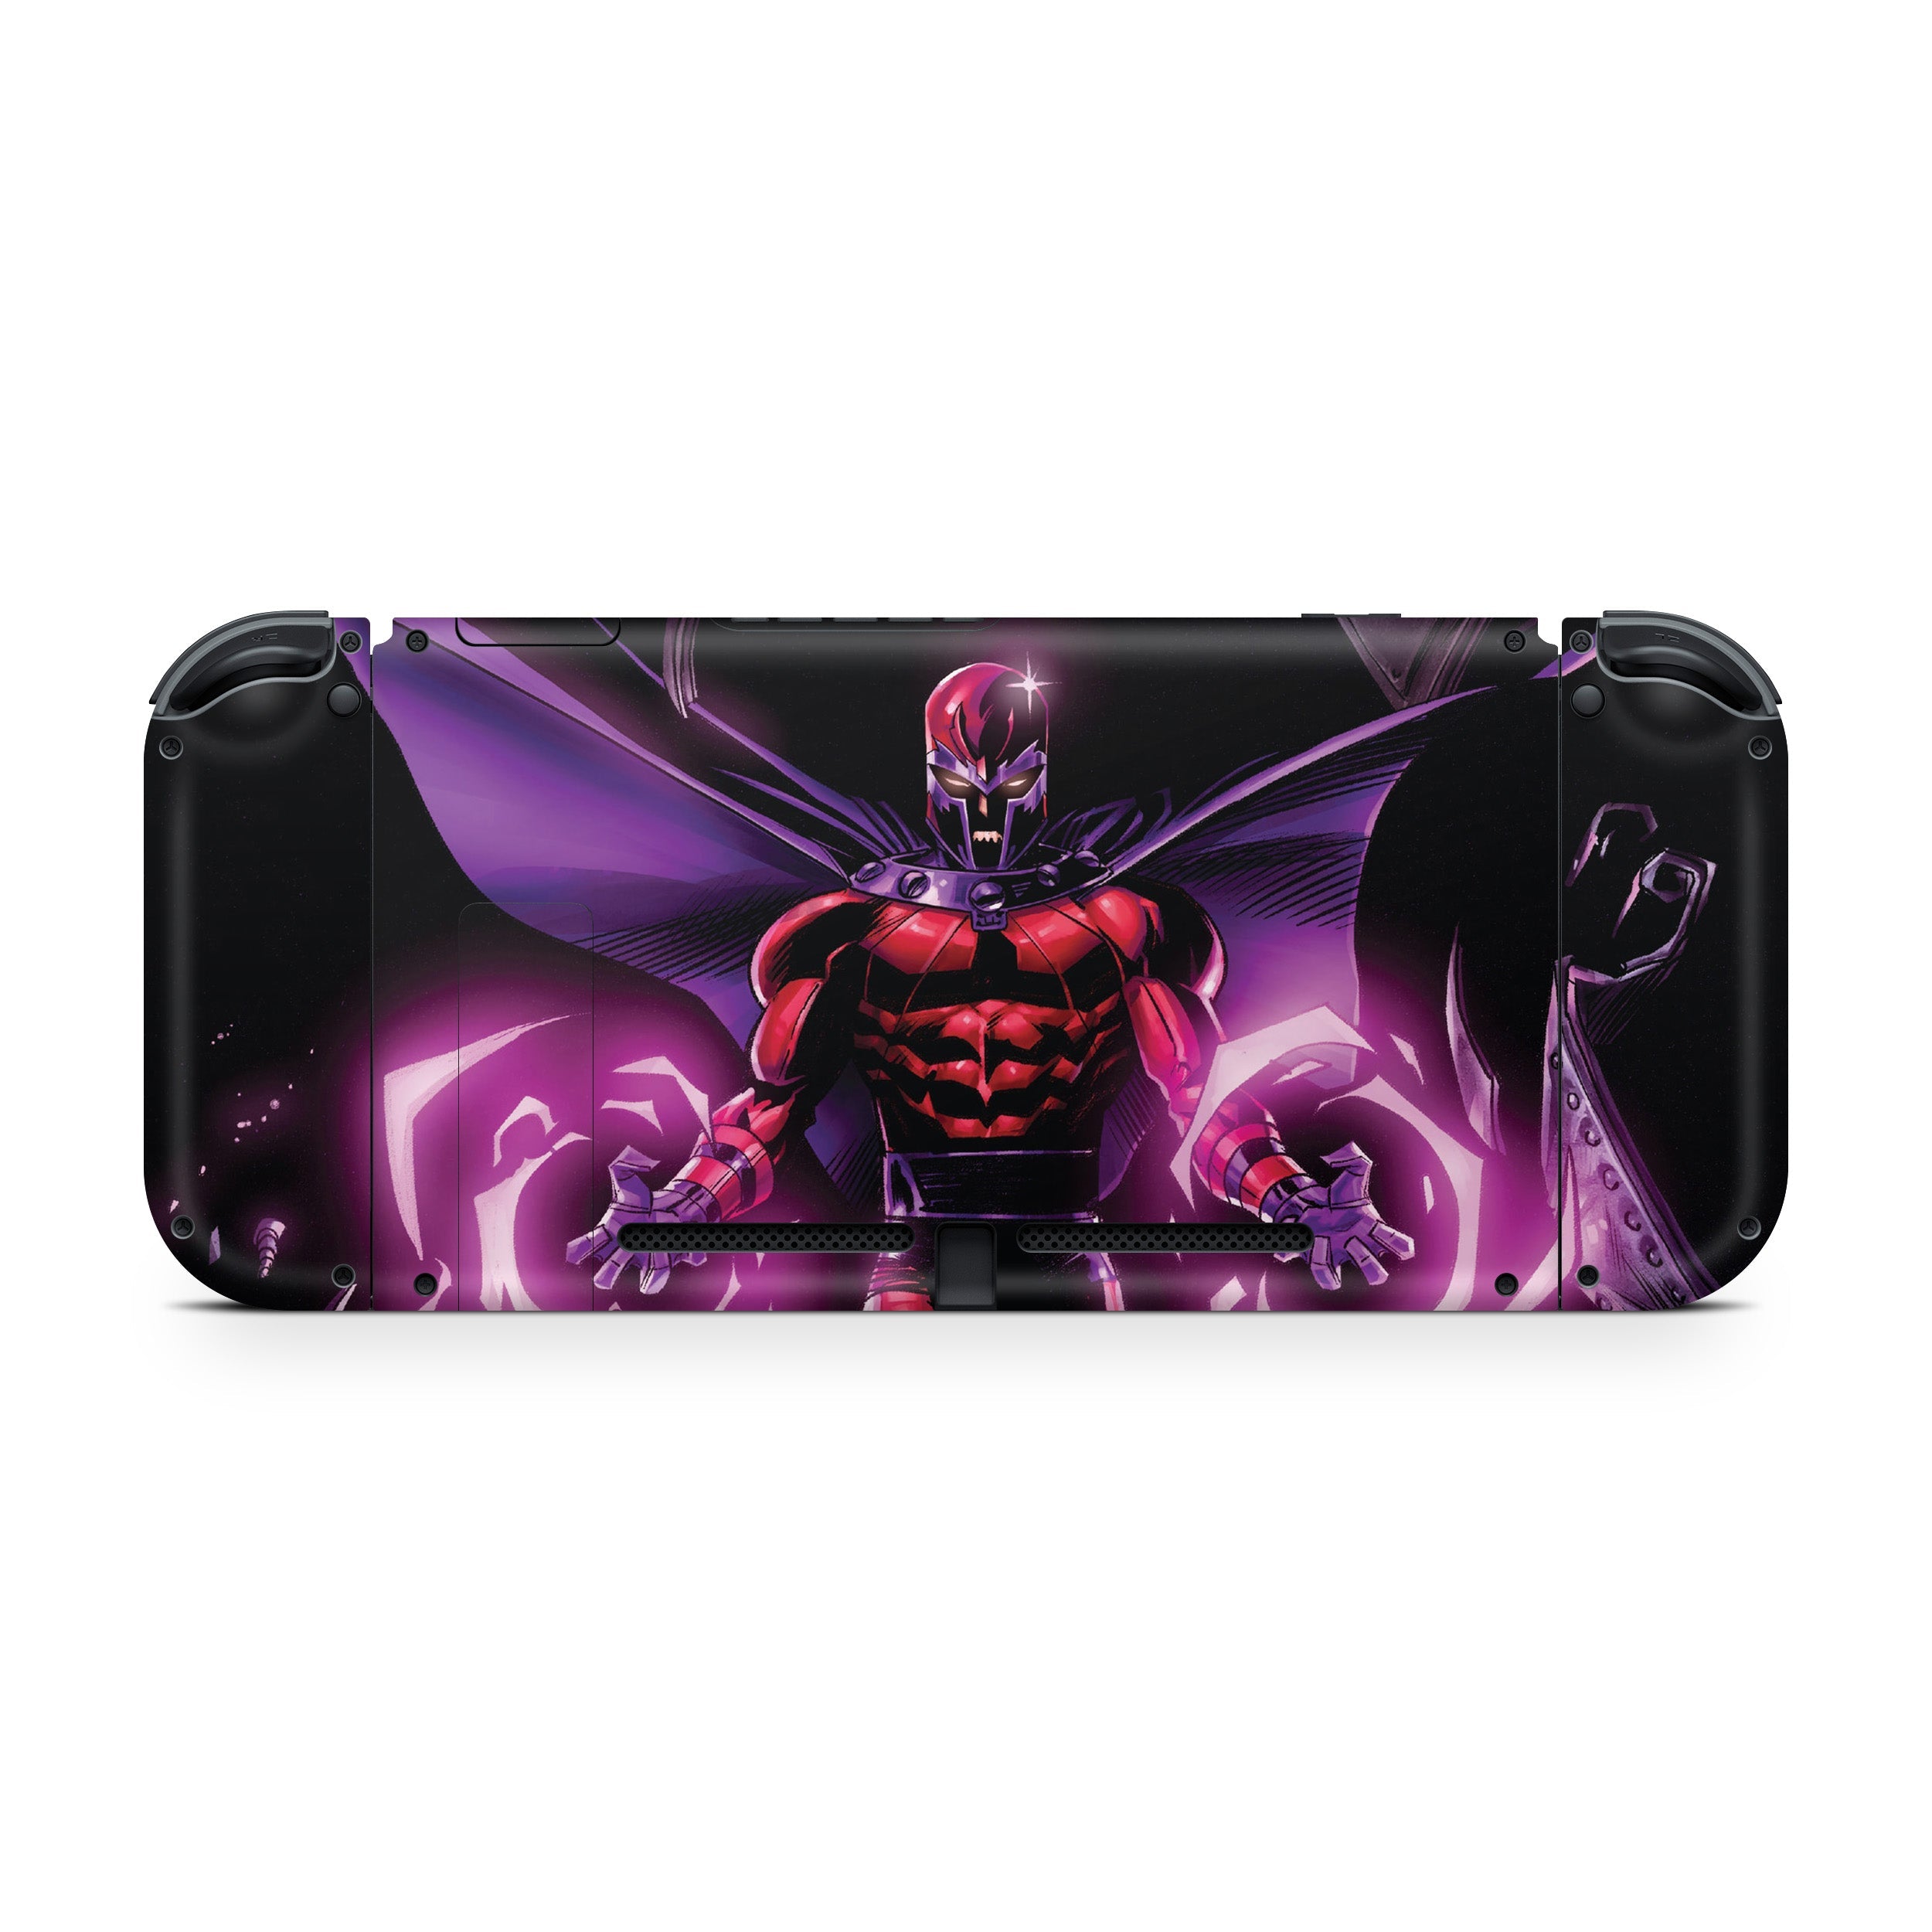 A video game skin featuring a Marvel Comics X Men Magneto design for the Nintendo Switch.